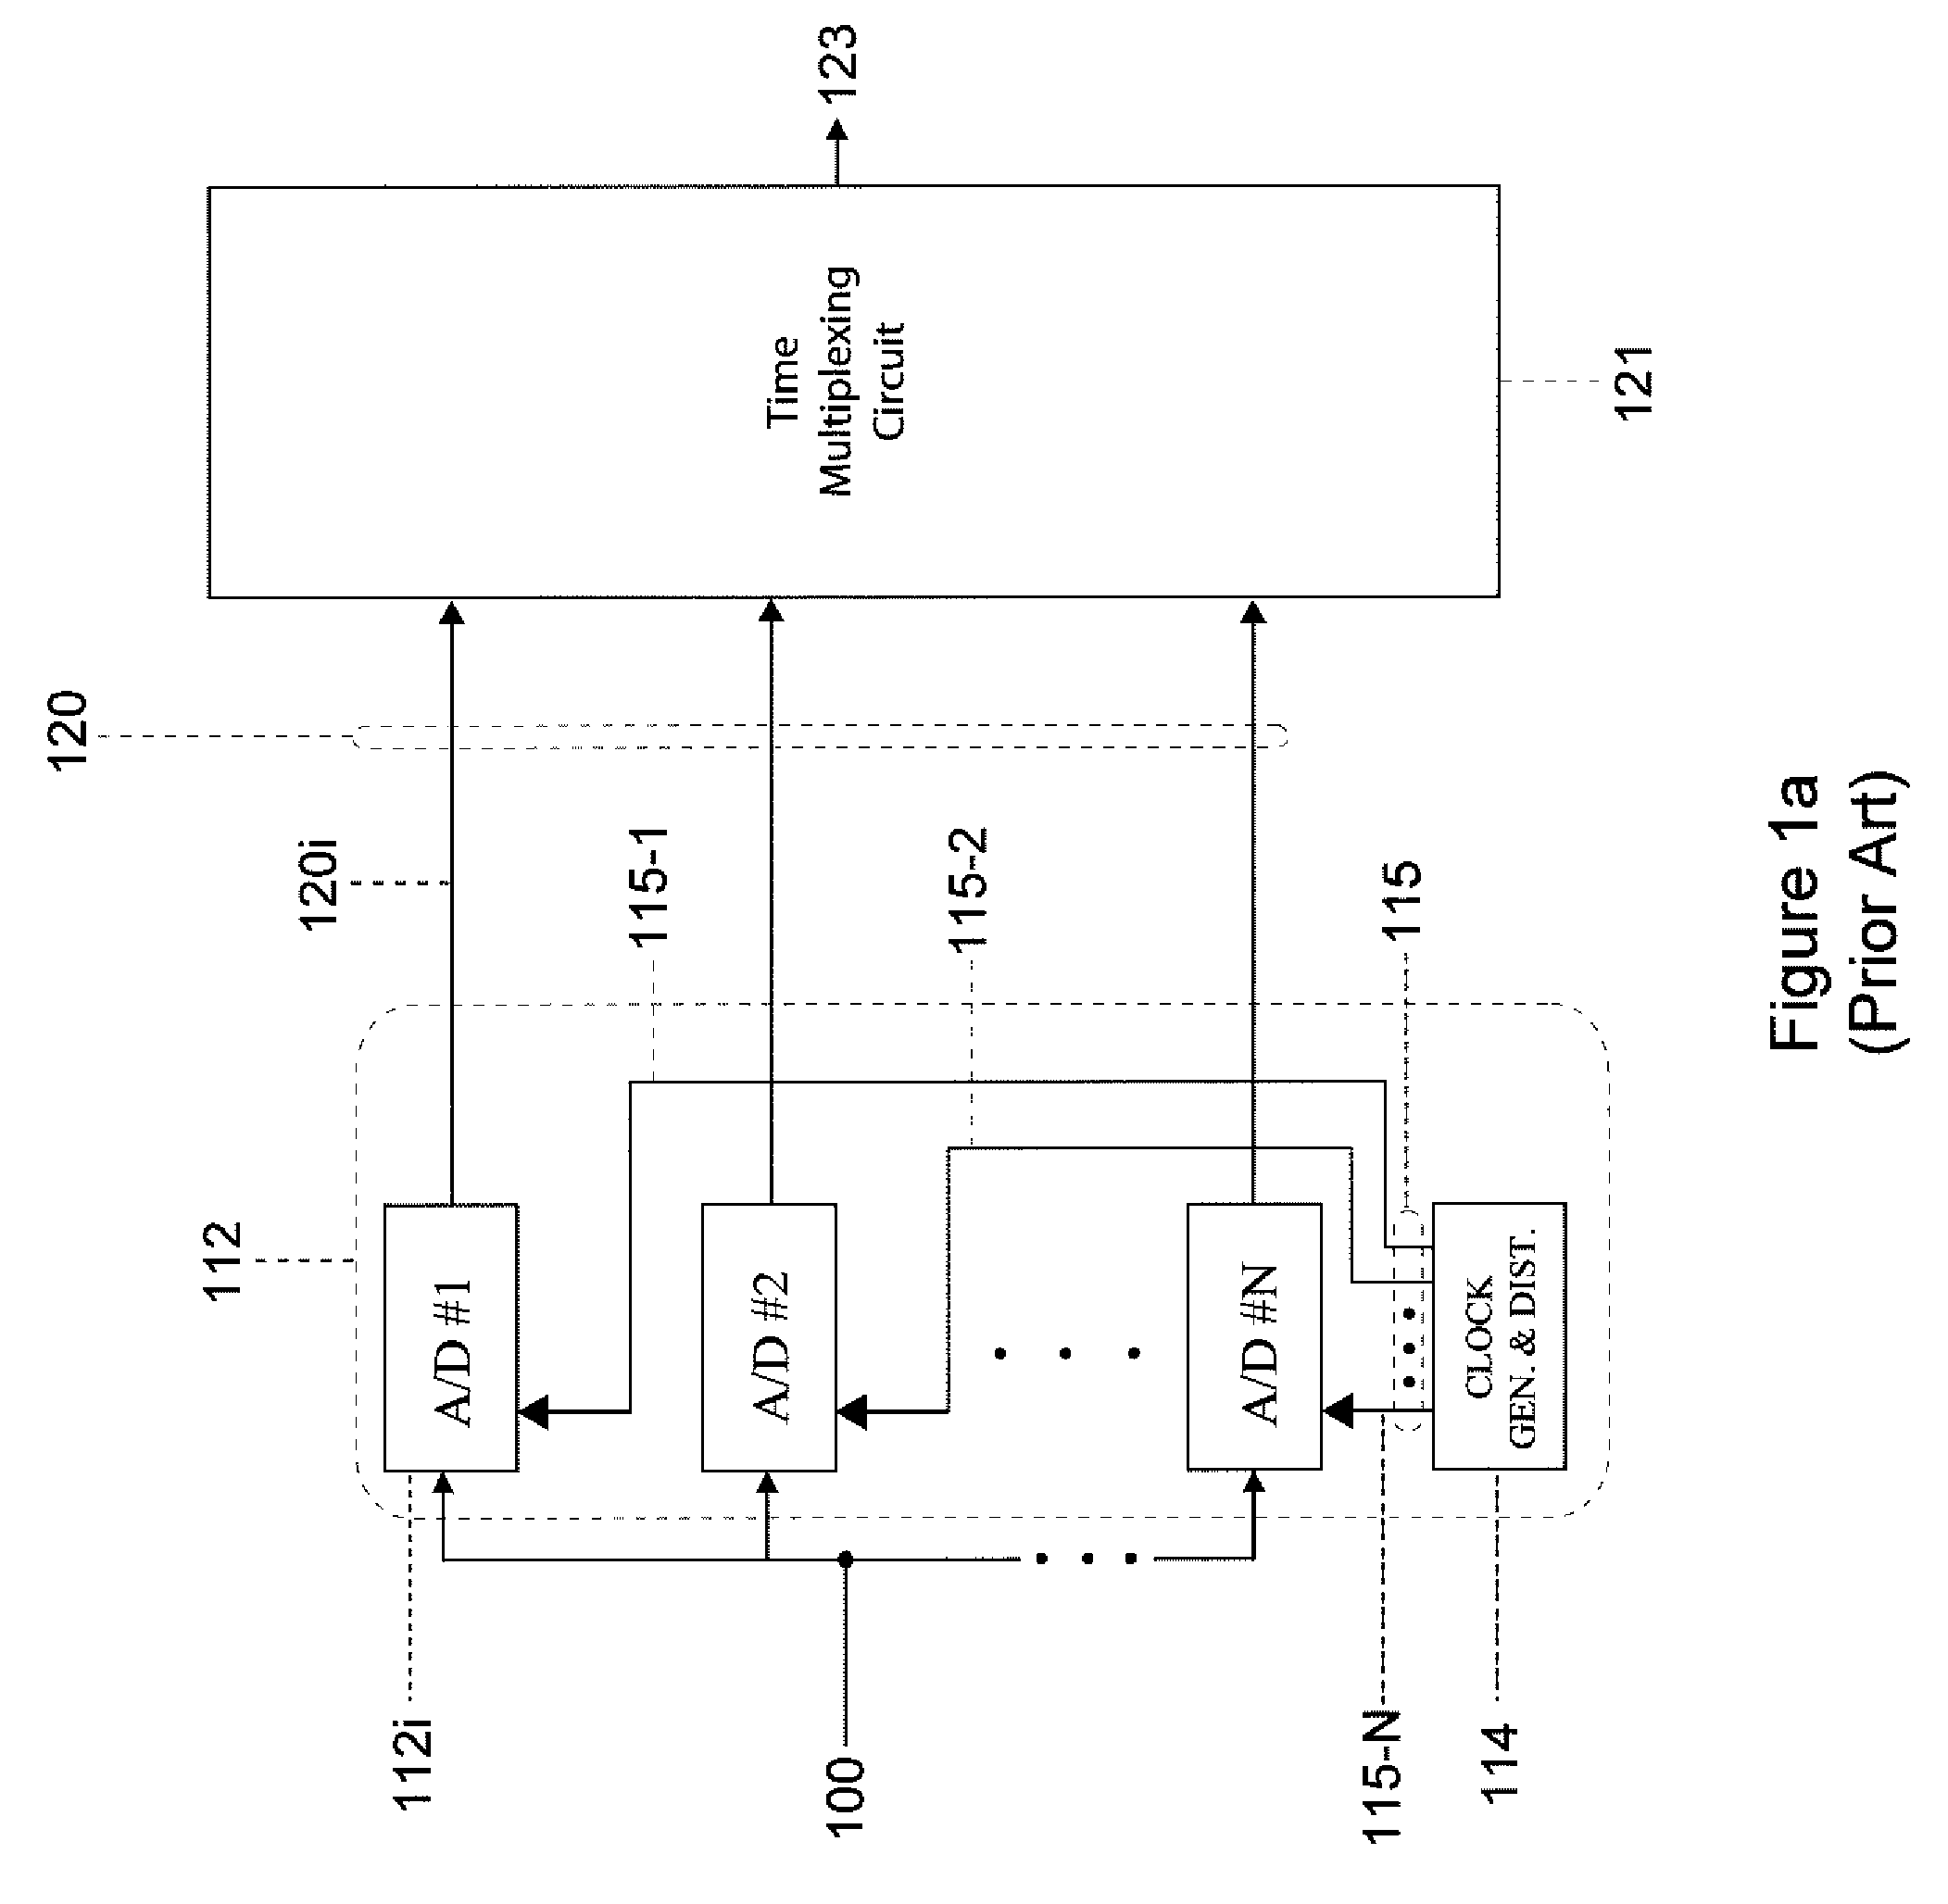 Enhanced Time-Interleaved A/D Conversion Using Compression